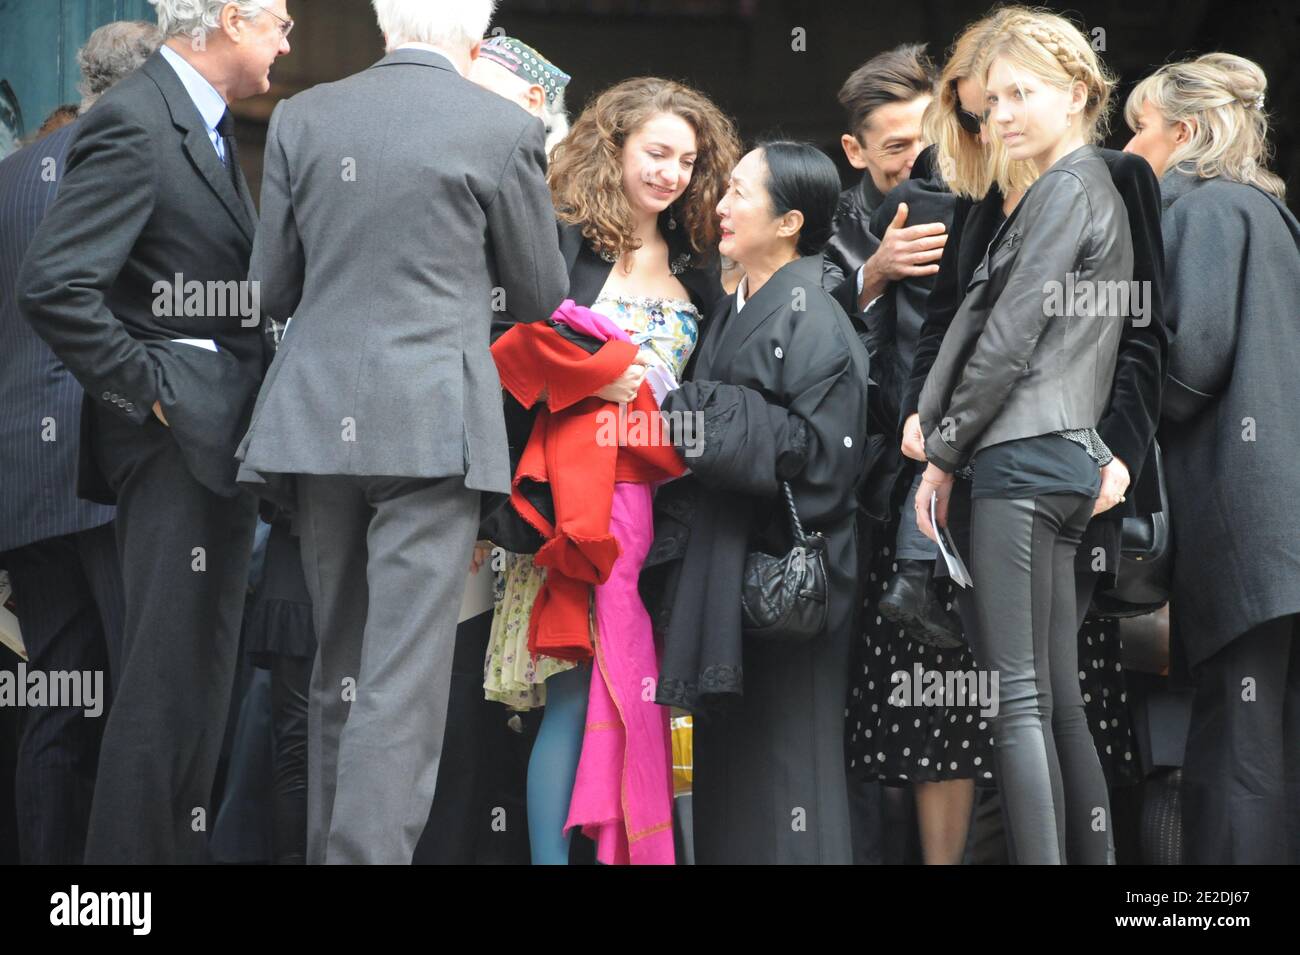 Guests arriving to Loulou de la Falaise 's funeral mass at Saint Roch  church in Paris, France on November 10, 2011. Louise Le Bailly de La  Falaise, former model, muse and jewelry